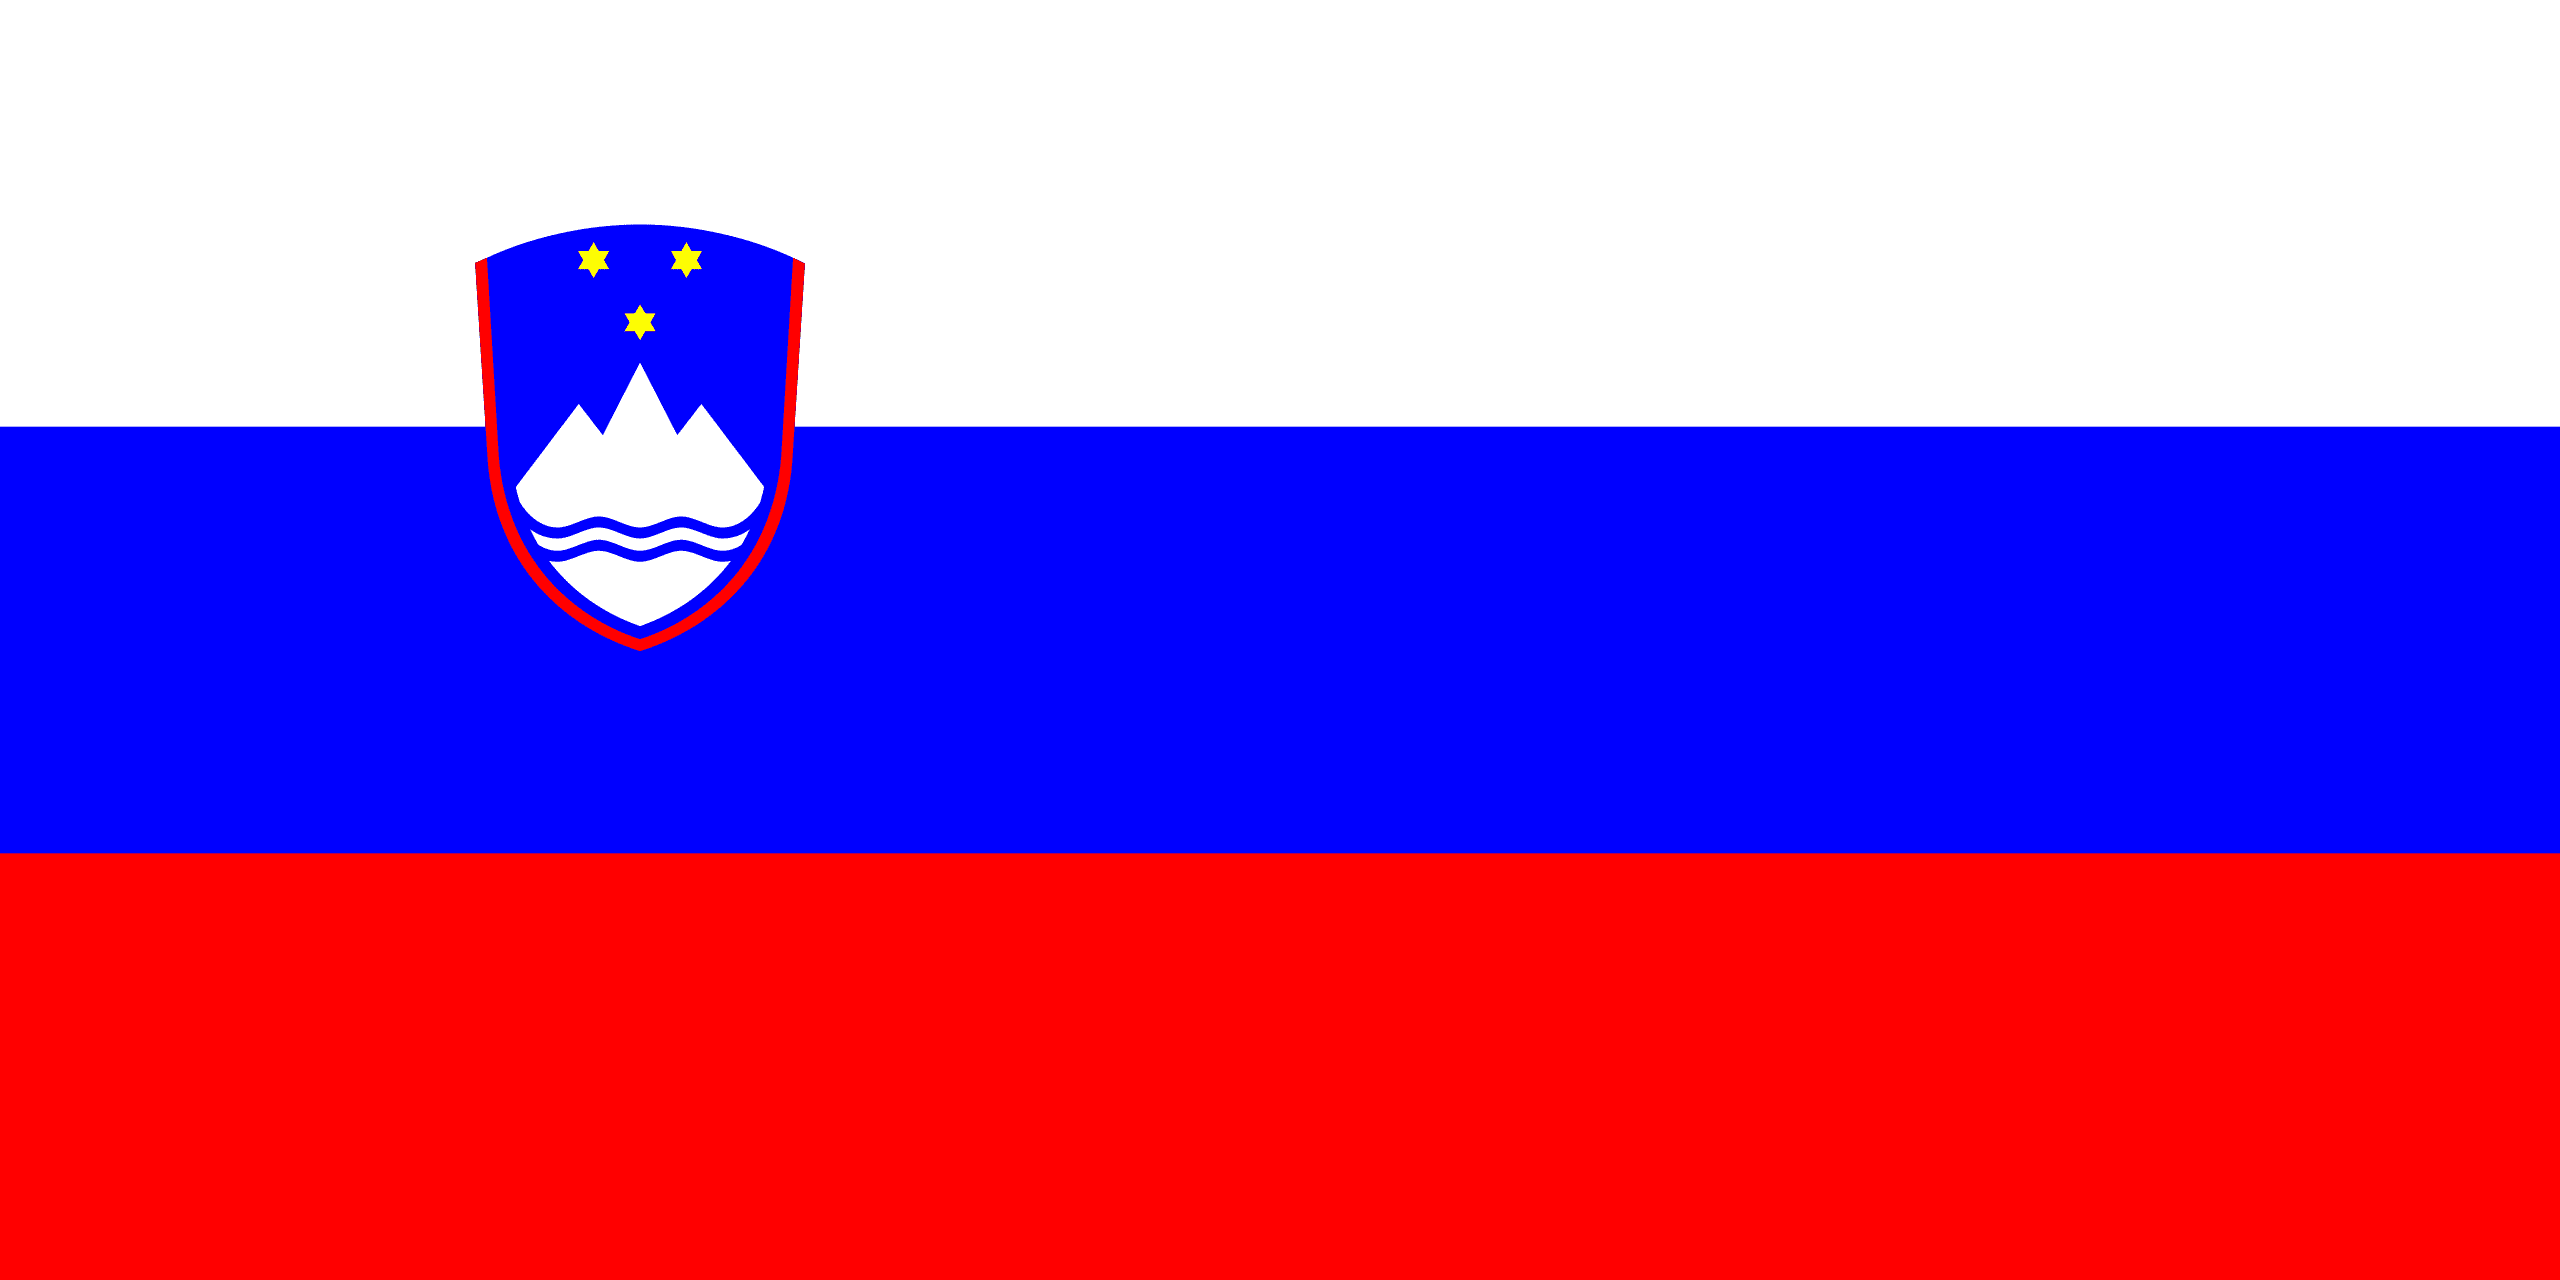 Facts of Slovenia